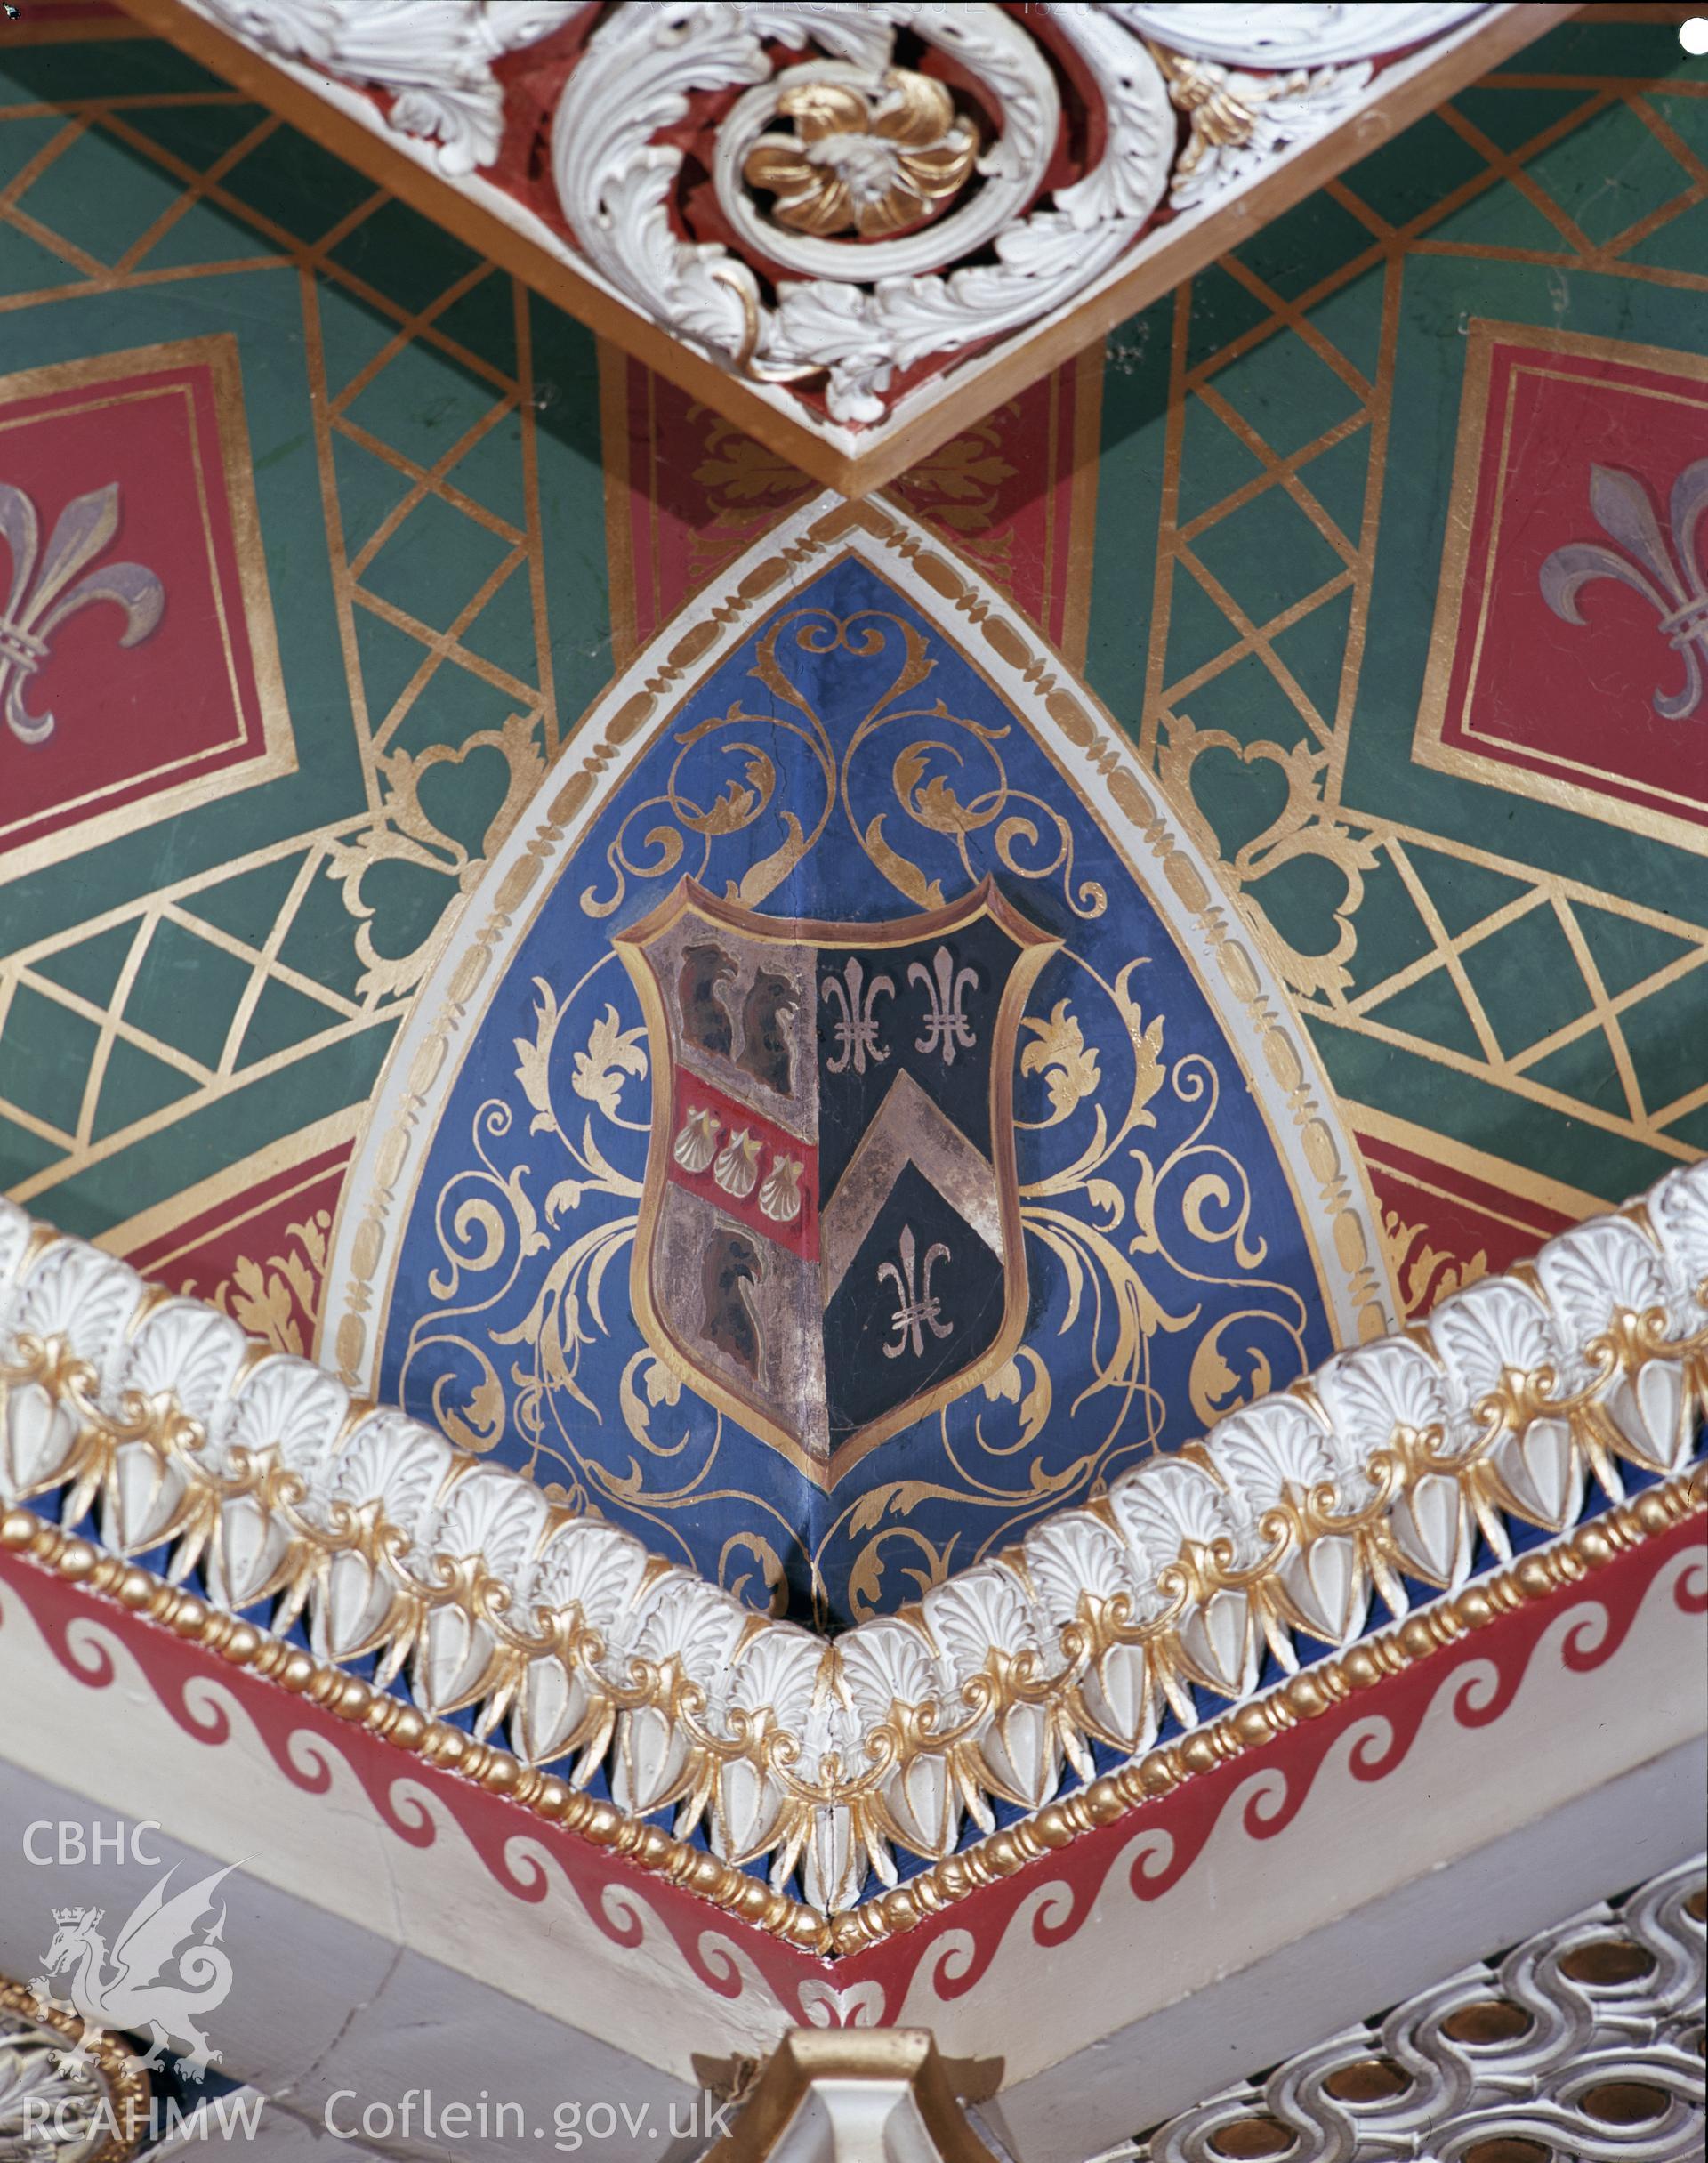 Colour image showing the ceiling in the library at Trawscoed.